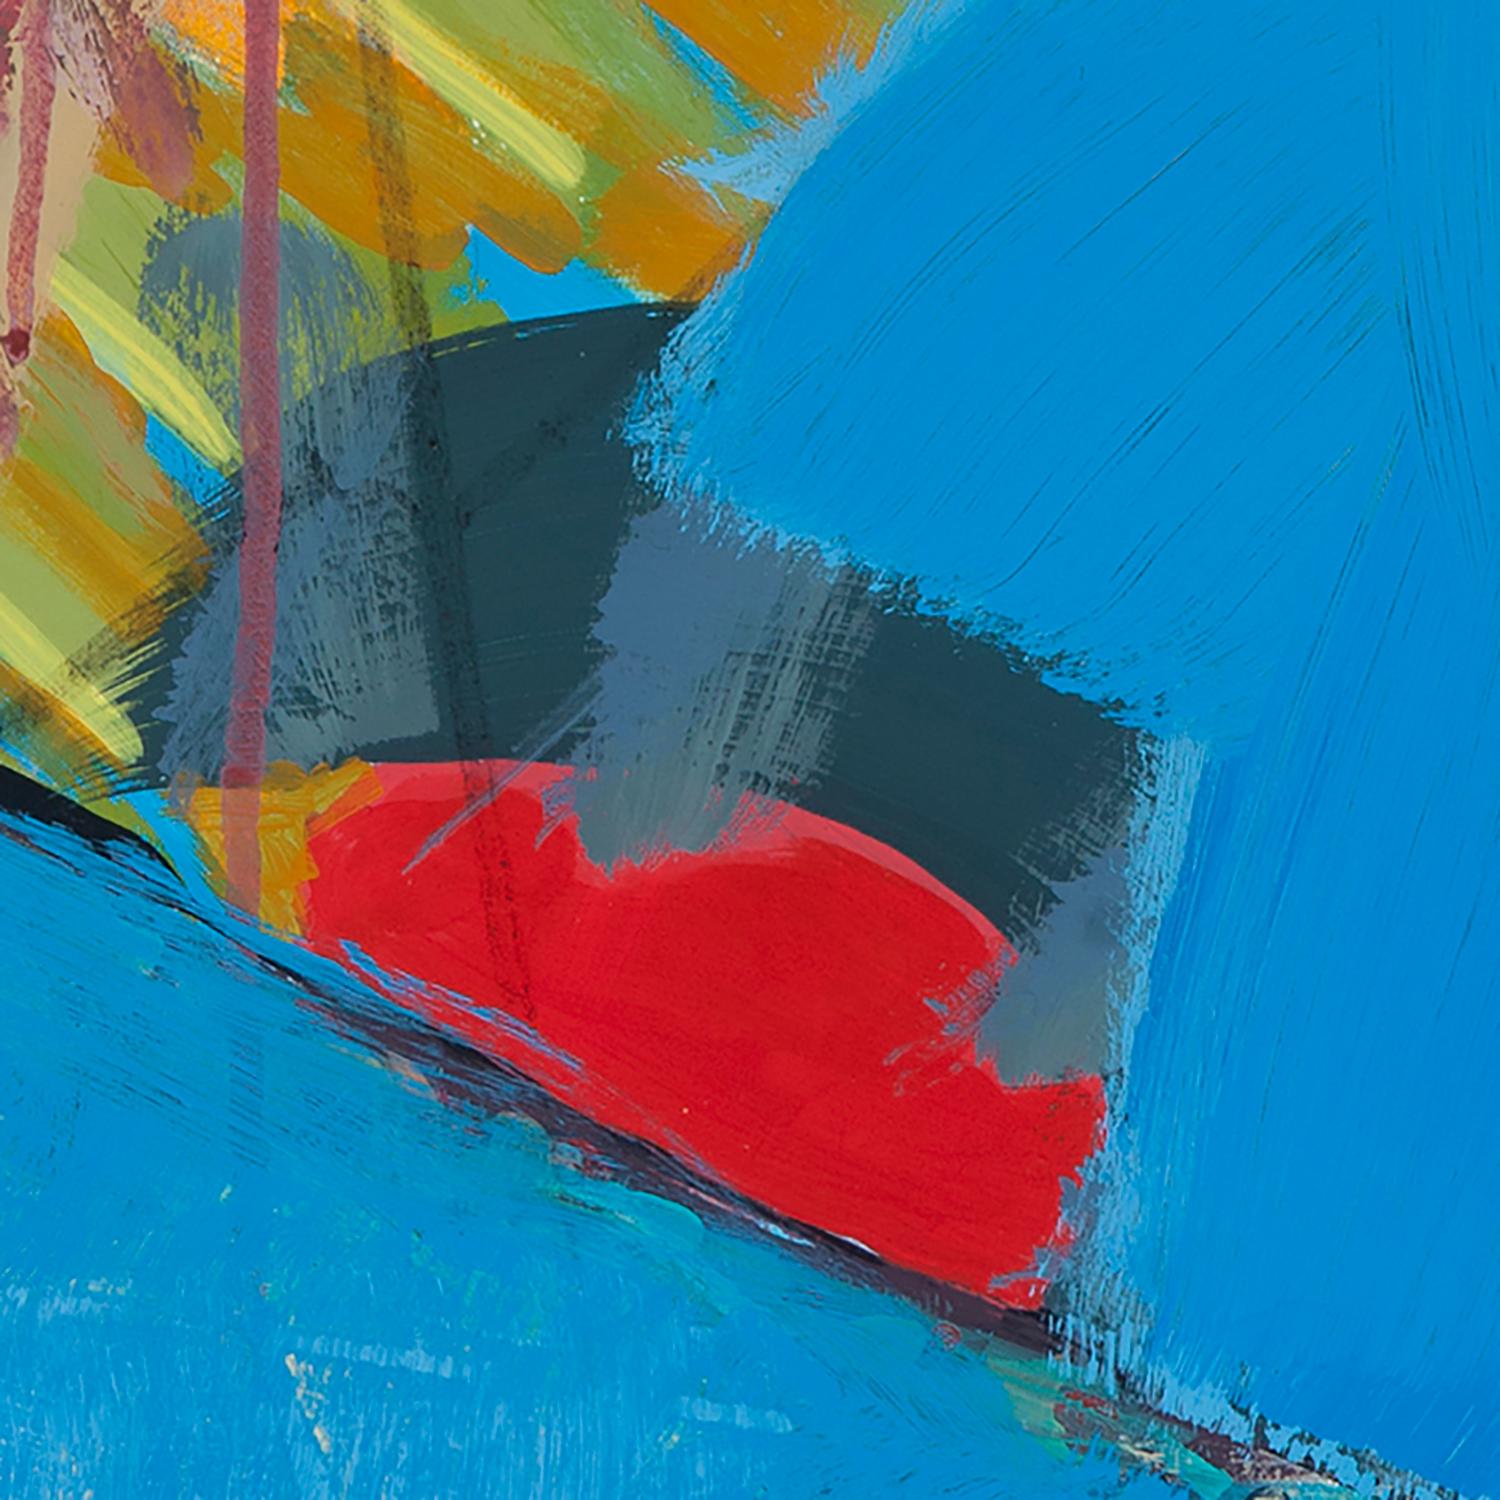 Melissa Shaak’s “Reds and Blues 1” is a 30 x 22 inch abstract acrylic painting on top-quality Stonehenge paper. Red-accented, patterned islands appear to float in a restful, spacious sea of blue. The painting evokes a dreamlike aerial view with